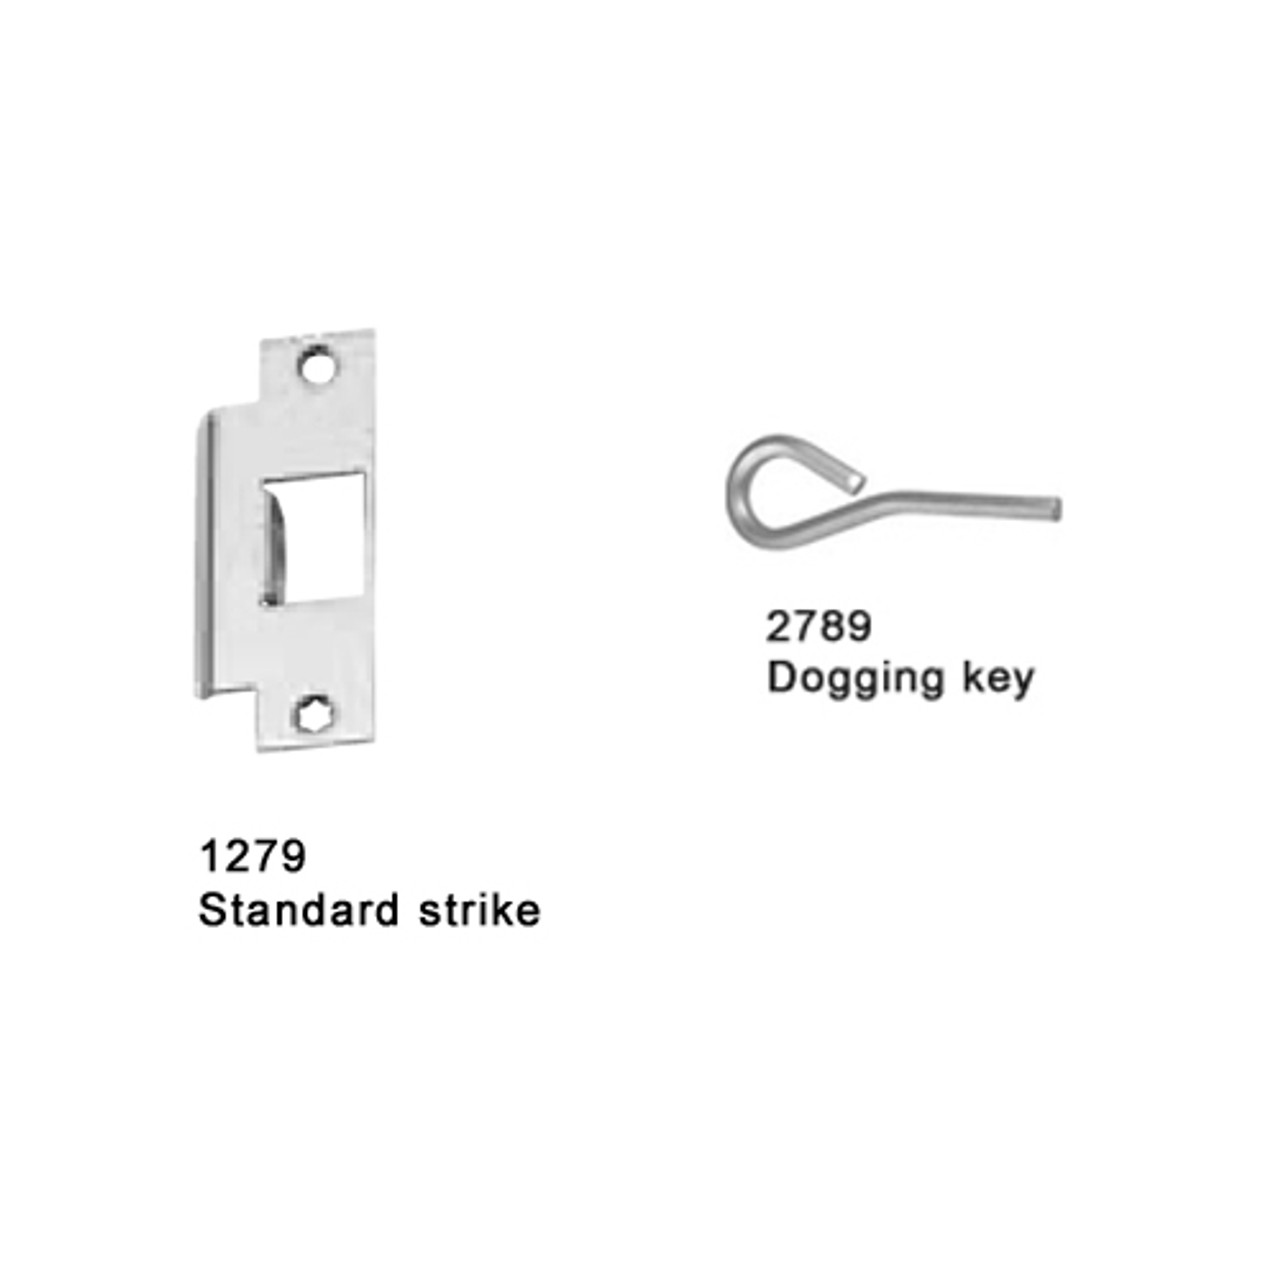 25-M-TP-US32-4-LHR Falcon 25 Series Mortise Lock Devices with 512TP Thumbpiece Trim in Polished Stainless Steel